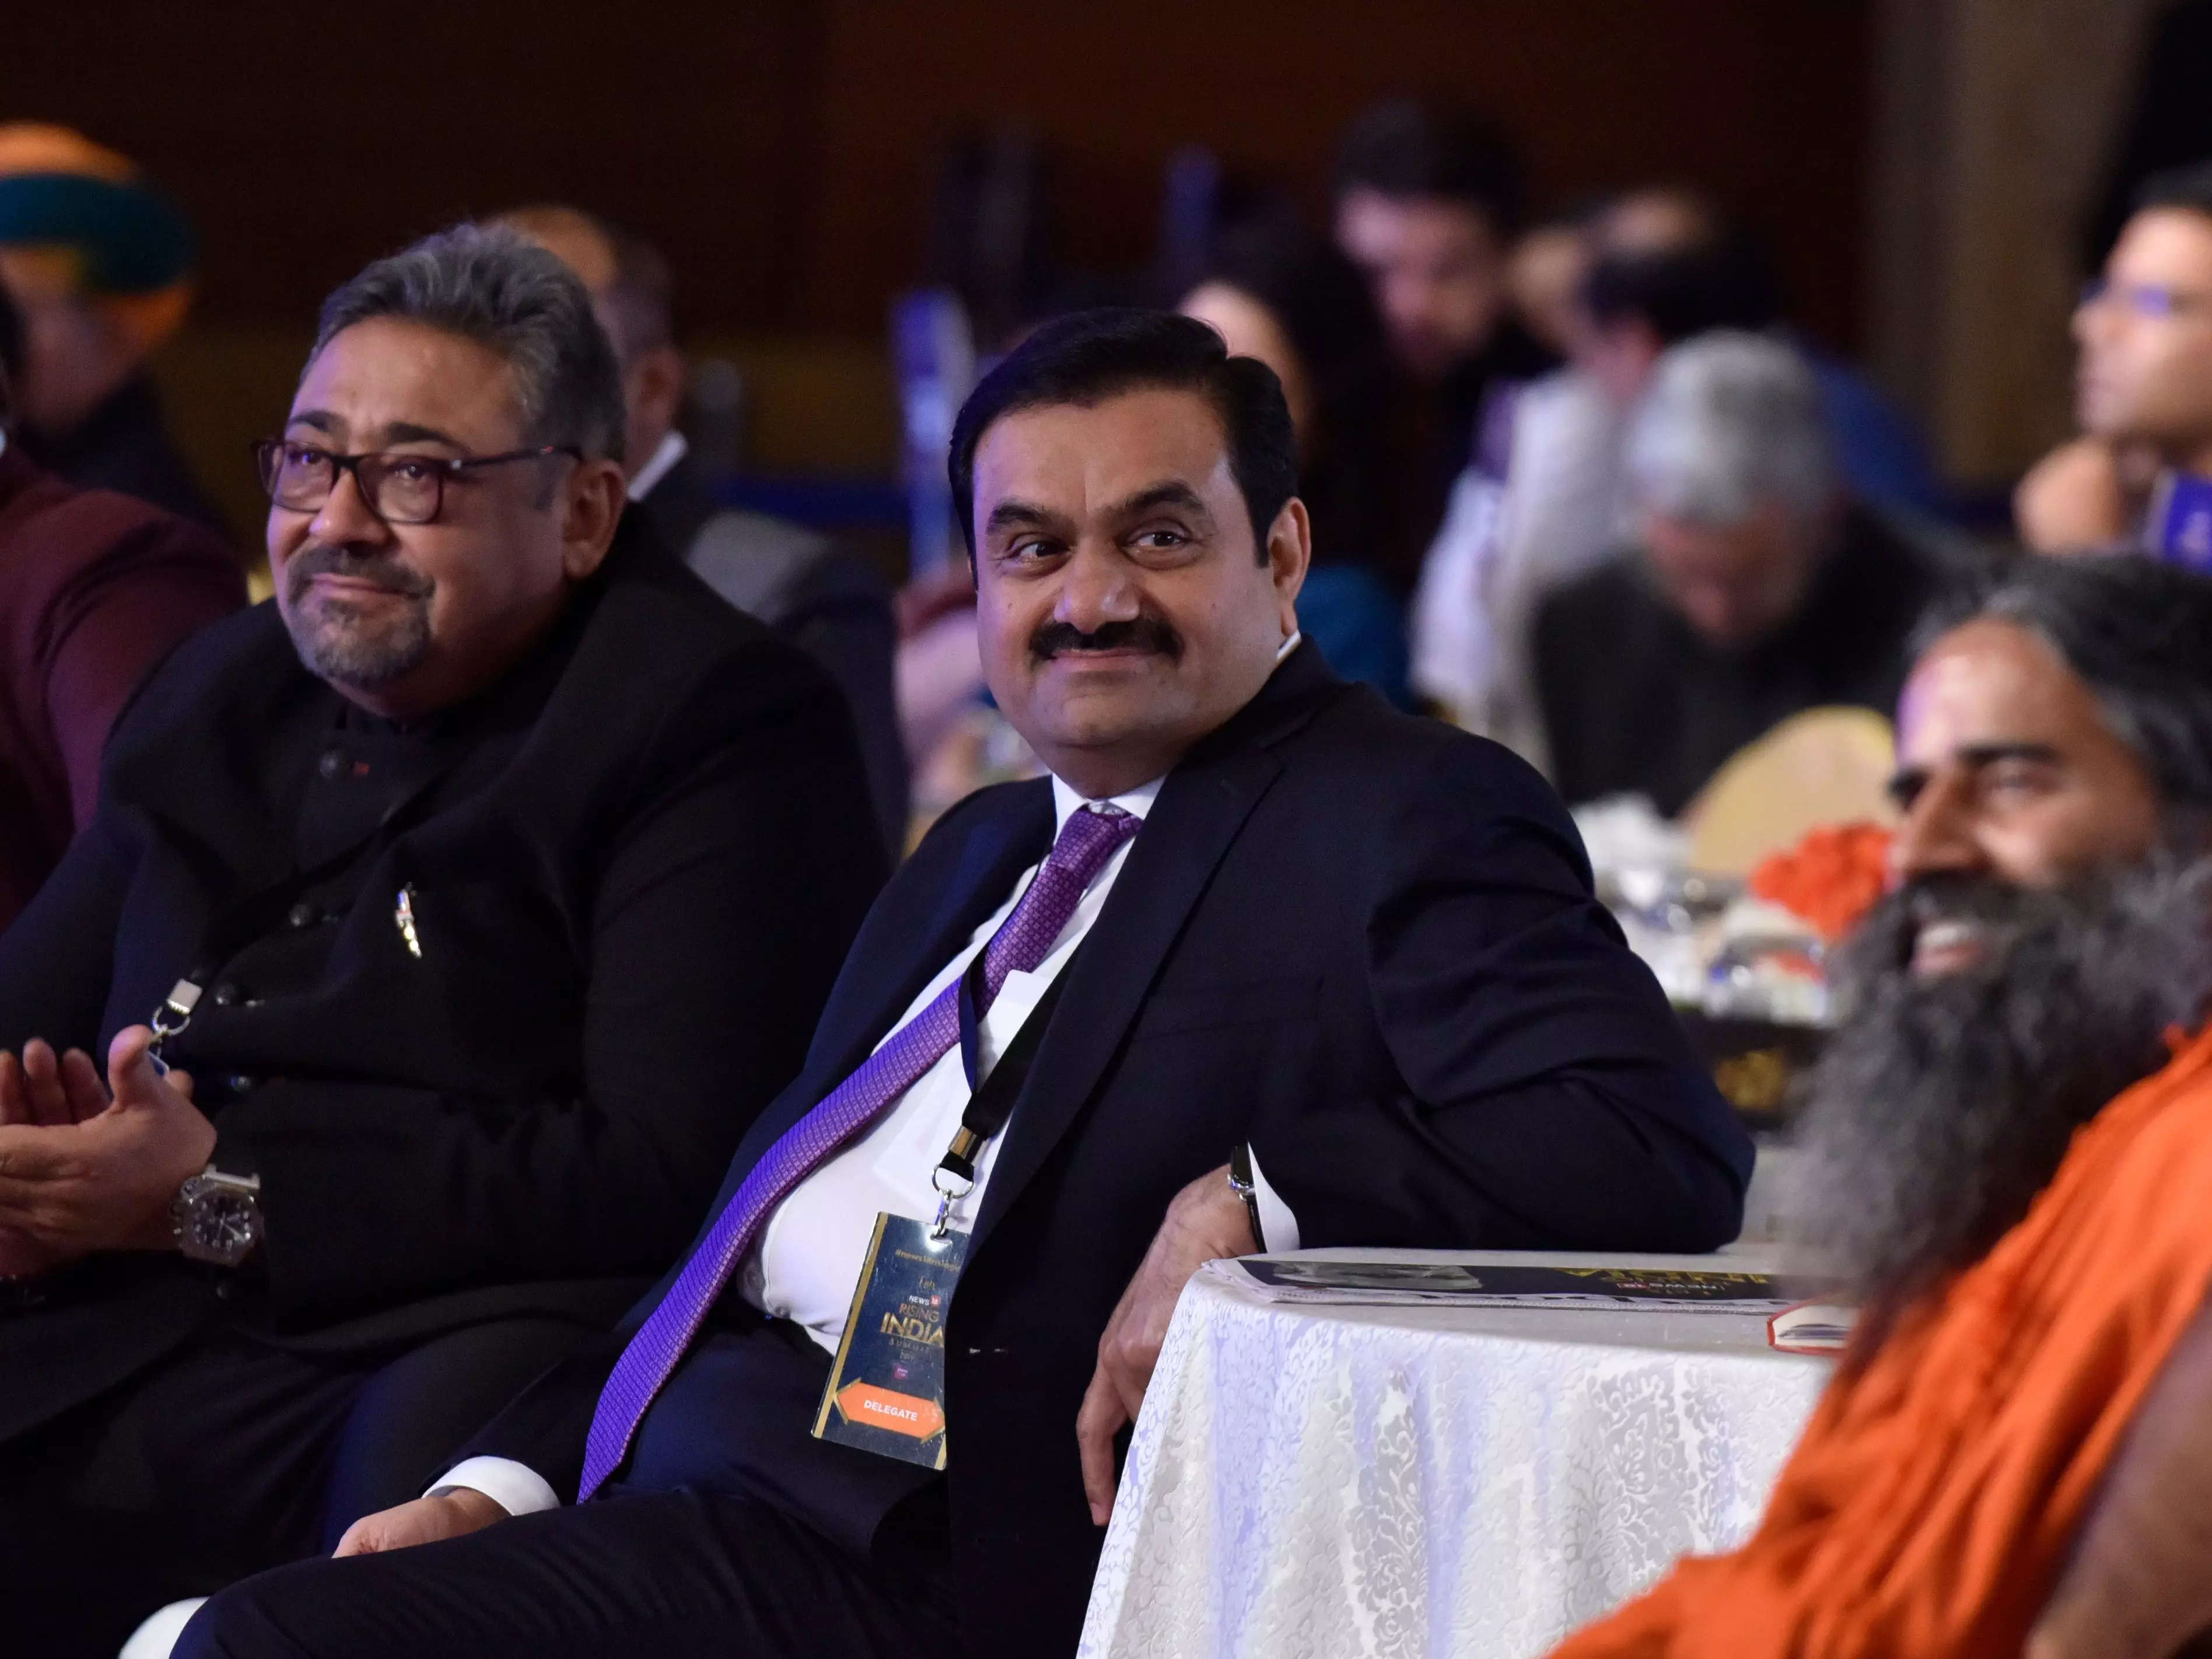 college dropout gautam adani, who survived a terrorist attack and a kidnapping, is now asia's richest person with a $88.5 billion fortune | business insider india